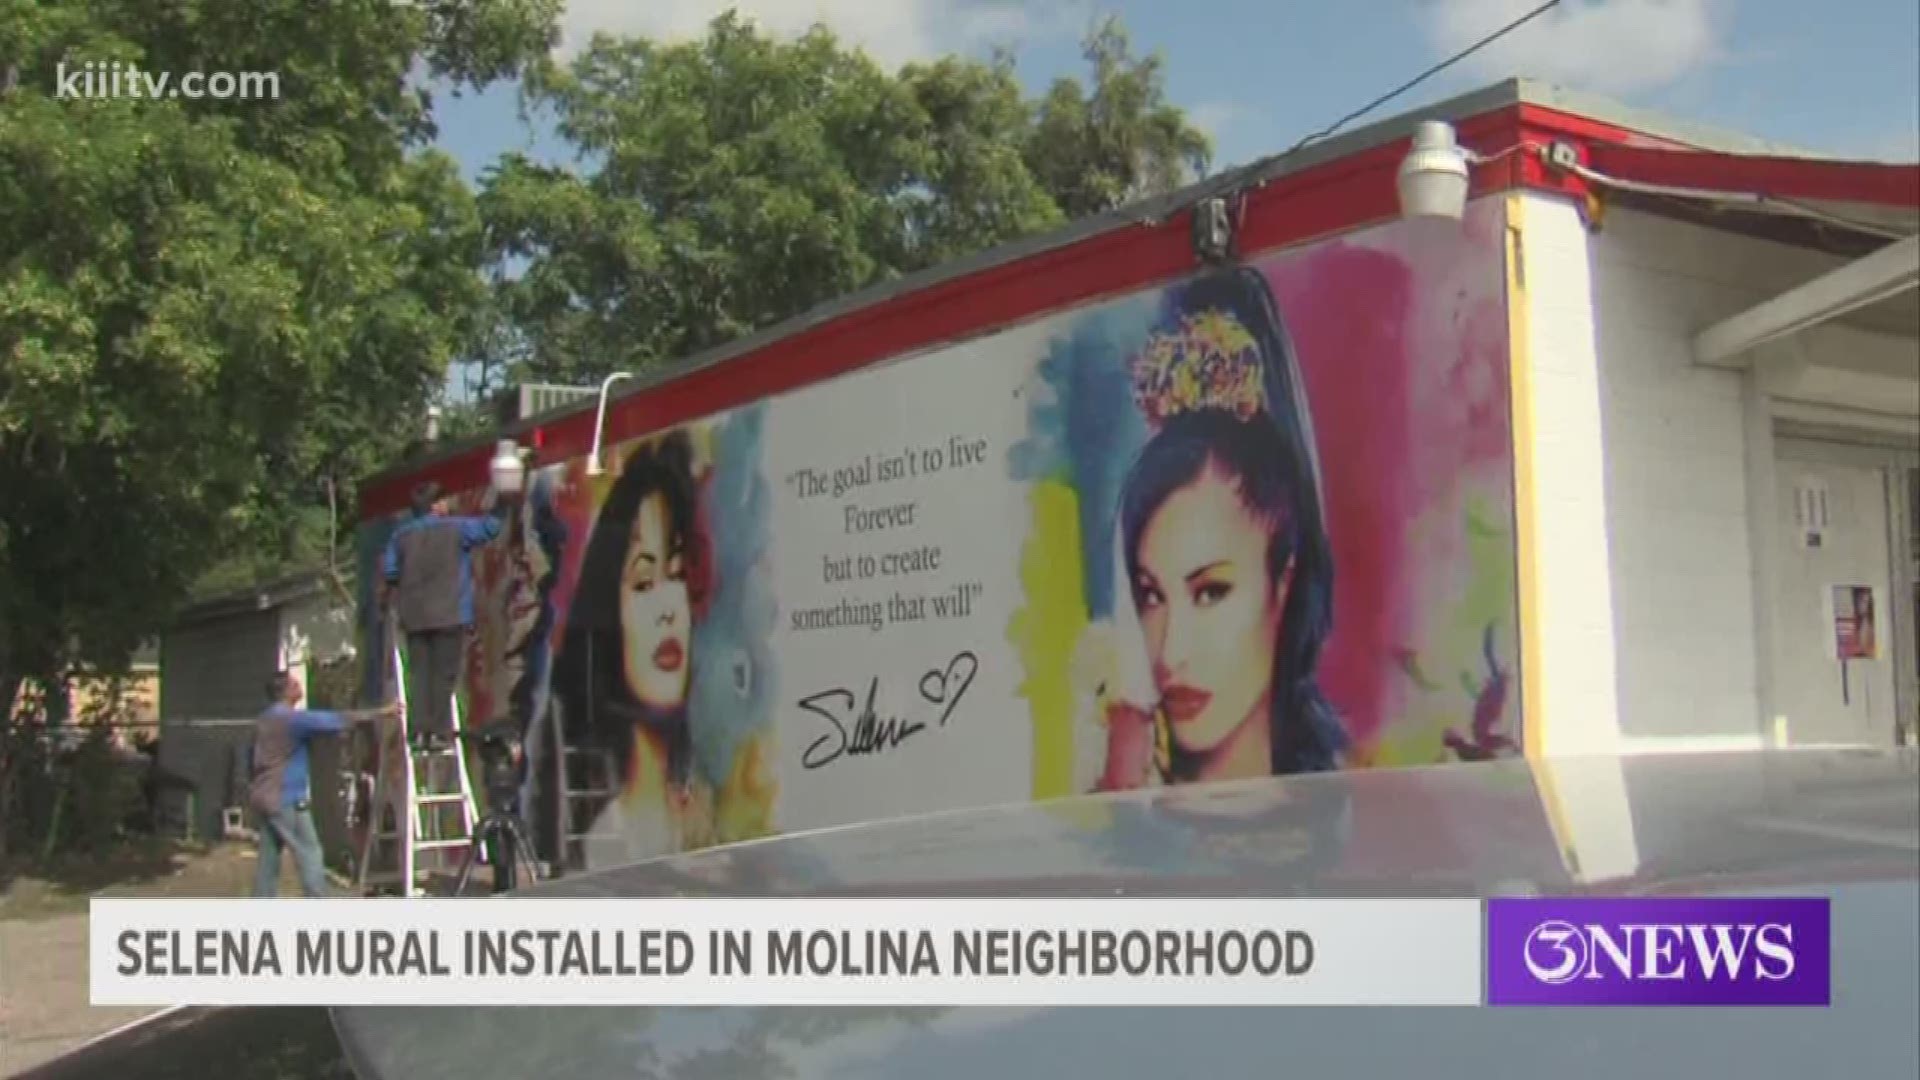 Residents near Bloomington and Elvira streets woke up Tuesday morning to a new Selena mural. Word spread quickly, and Molina residents started showing up to get a first look at it.